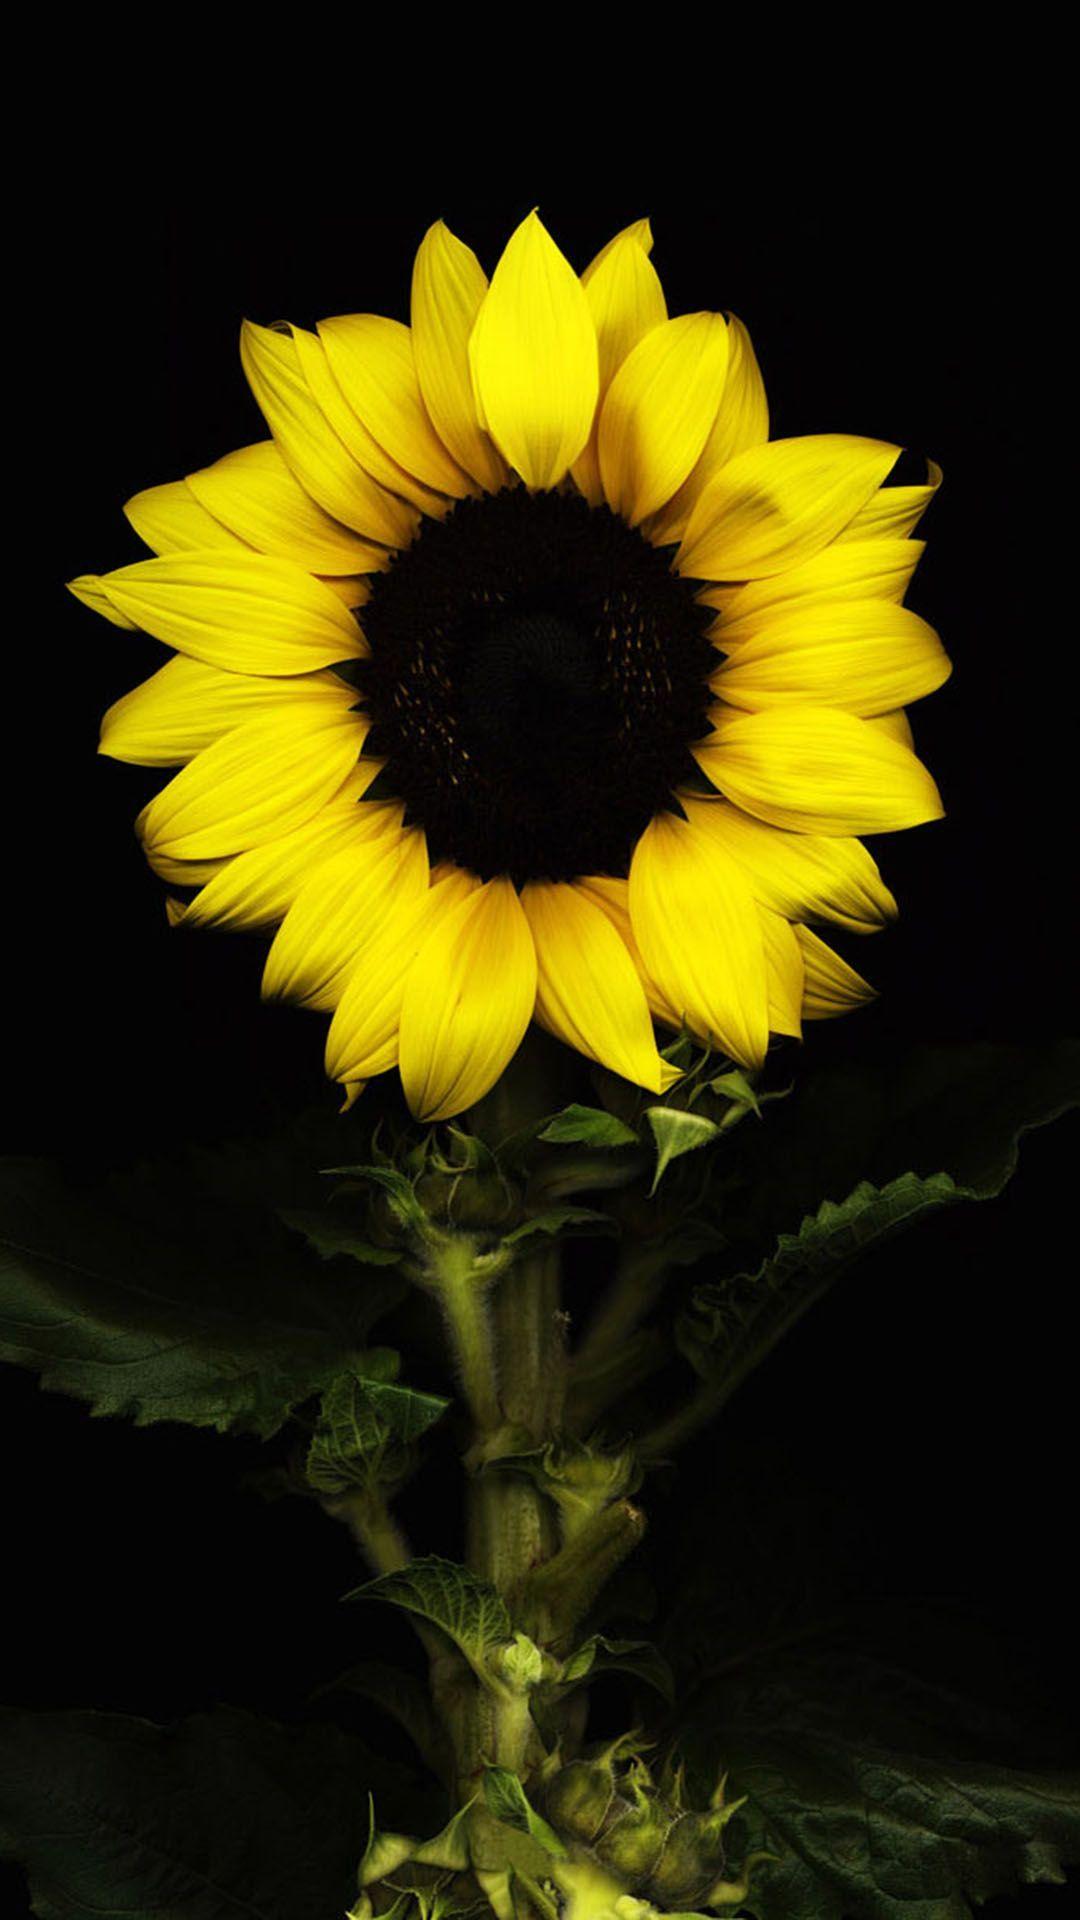 Black Sunflower Wallpapers Top Free Black Sunflower Backgrounds